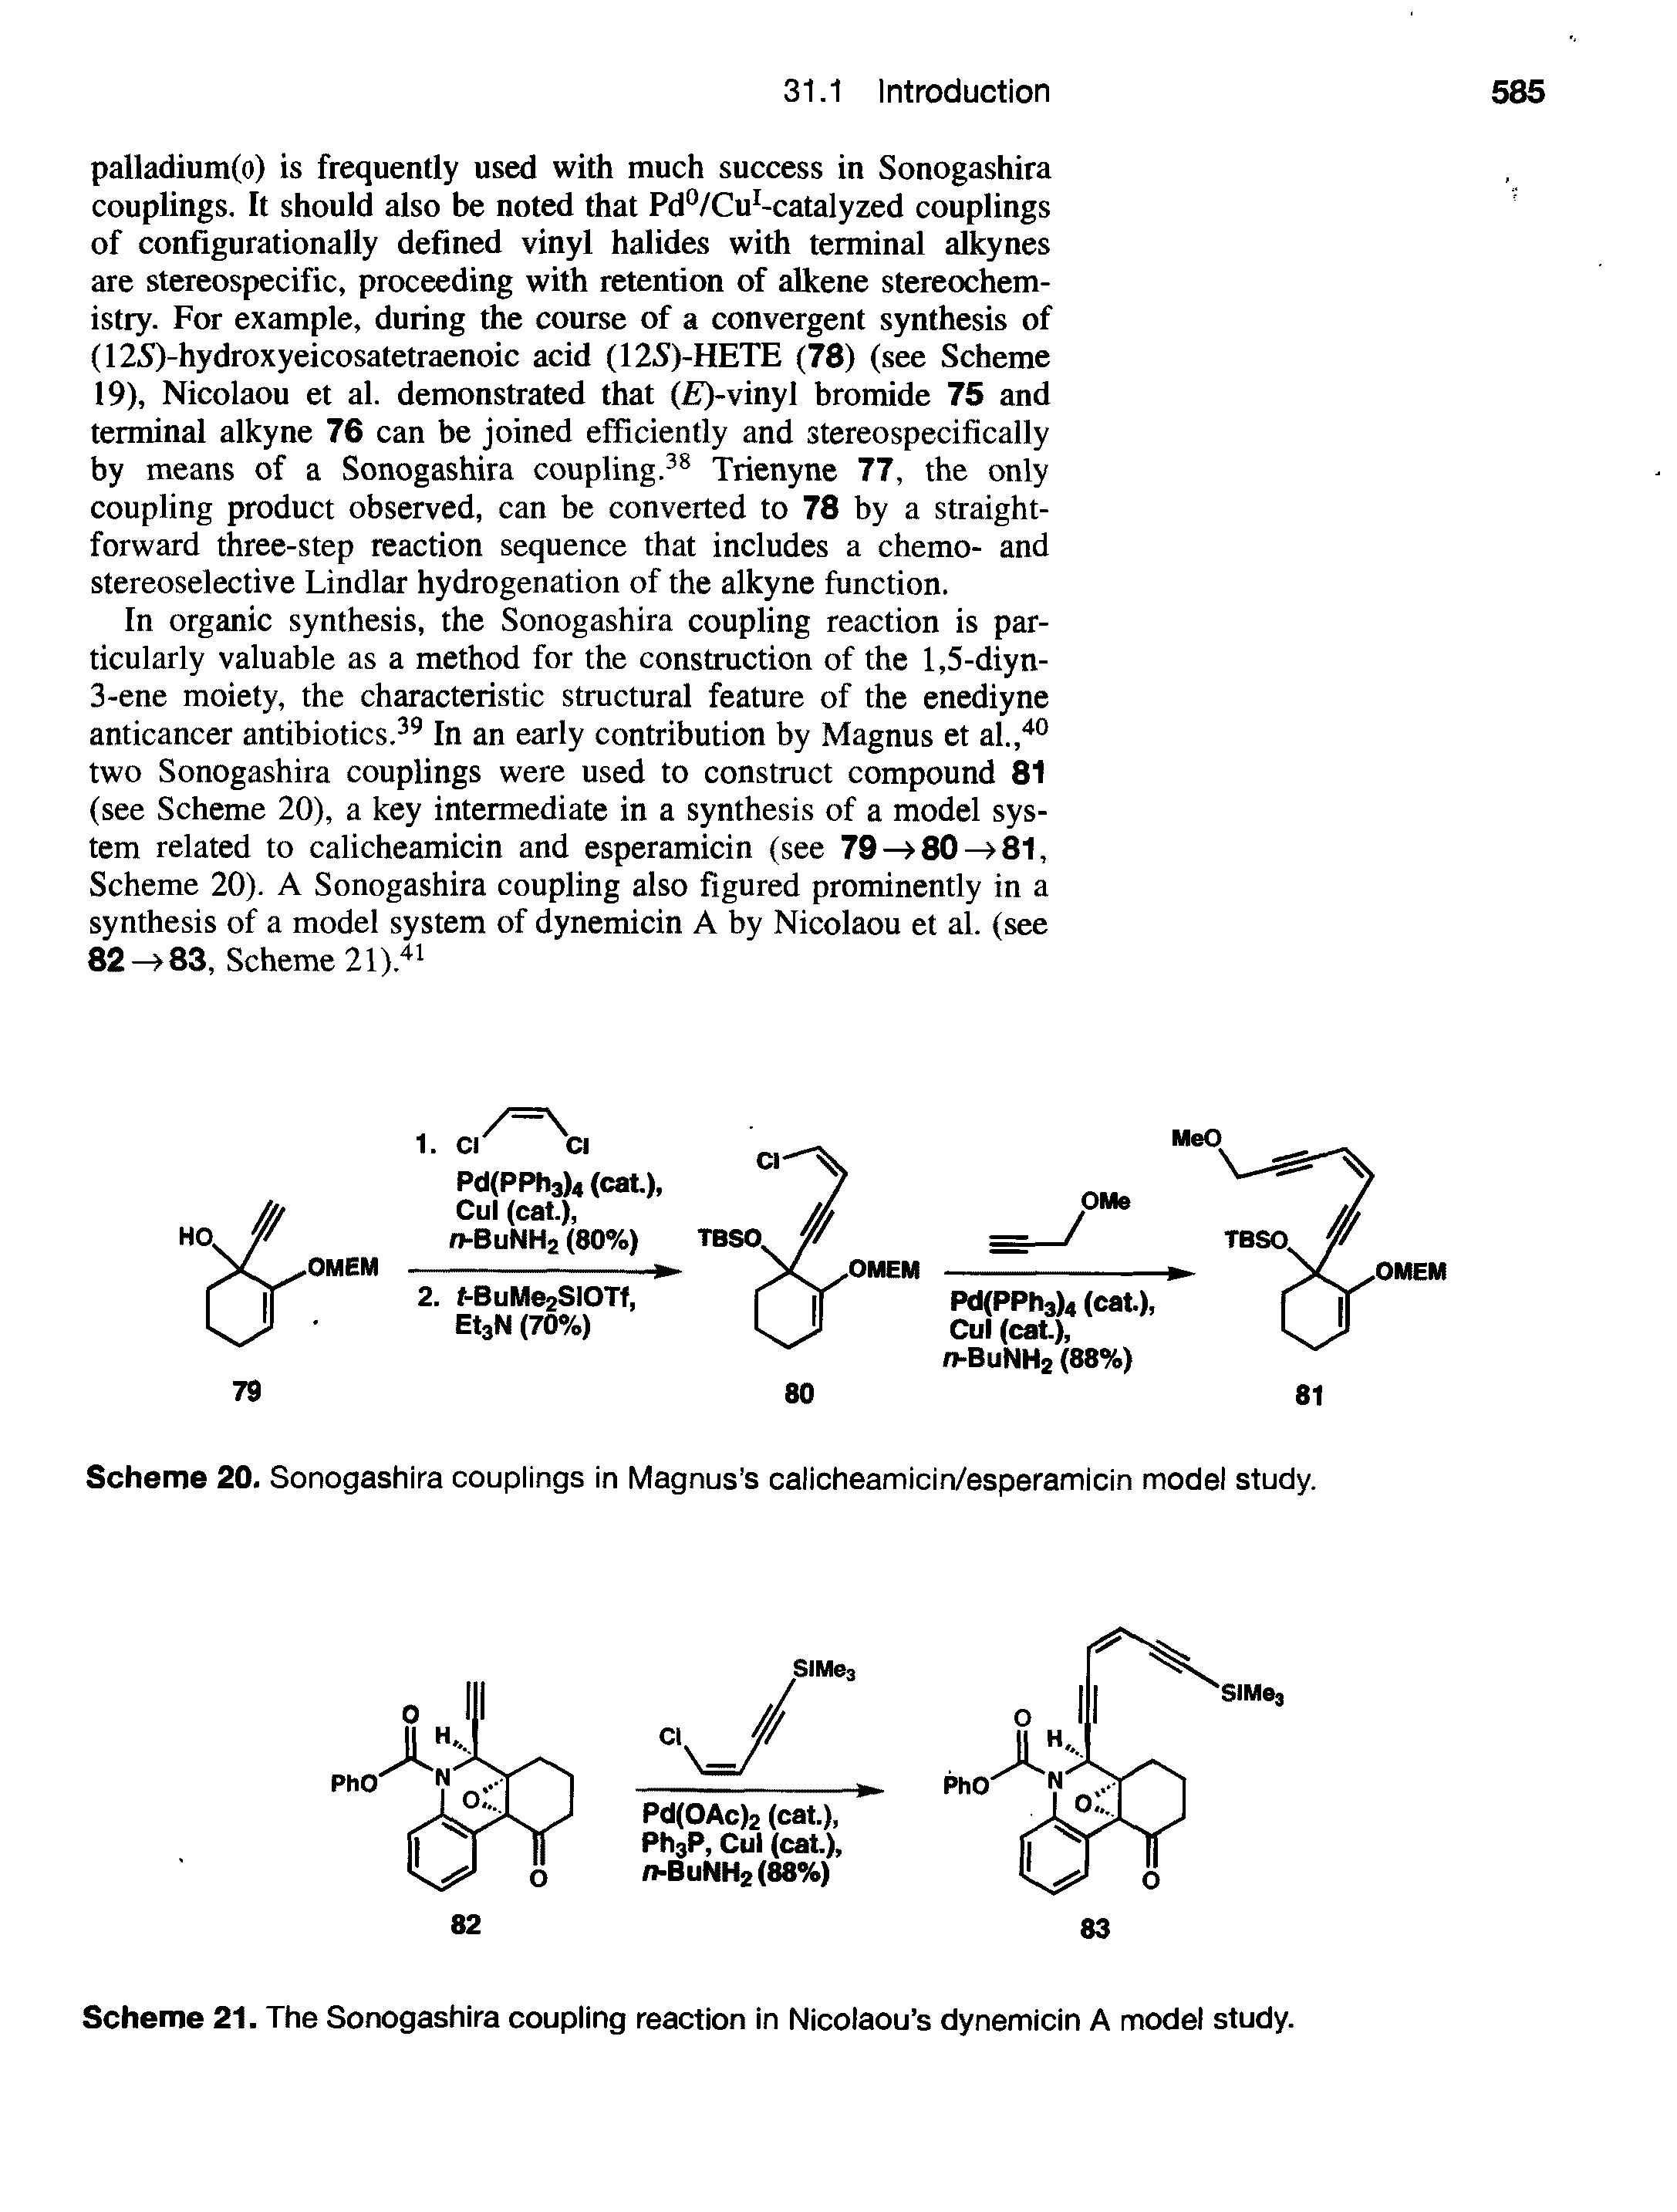 Scheme 21. The Sonogashira coupling reaction in Nicolaou s dynemicin A model study.